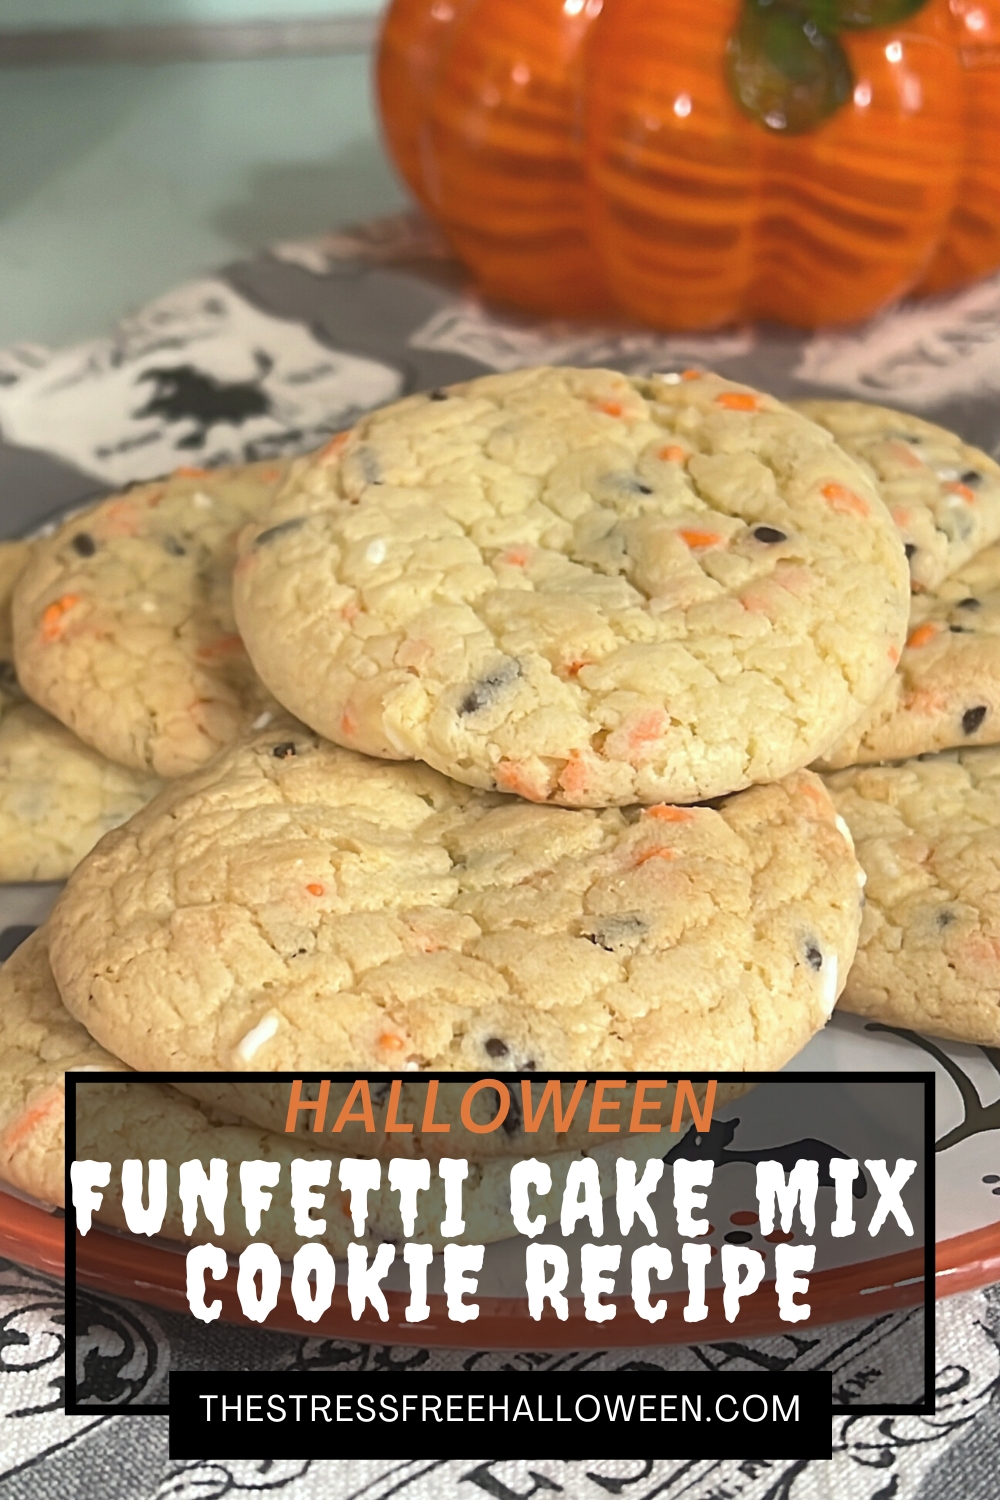 Cookies with orange, black, and white sprinkles on Halloween plate with glass pumpkin the background. Text overlay- Halloween Funfetti Cake Mix Cookie Recipe